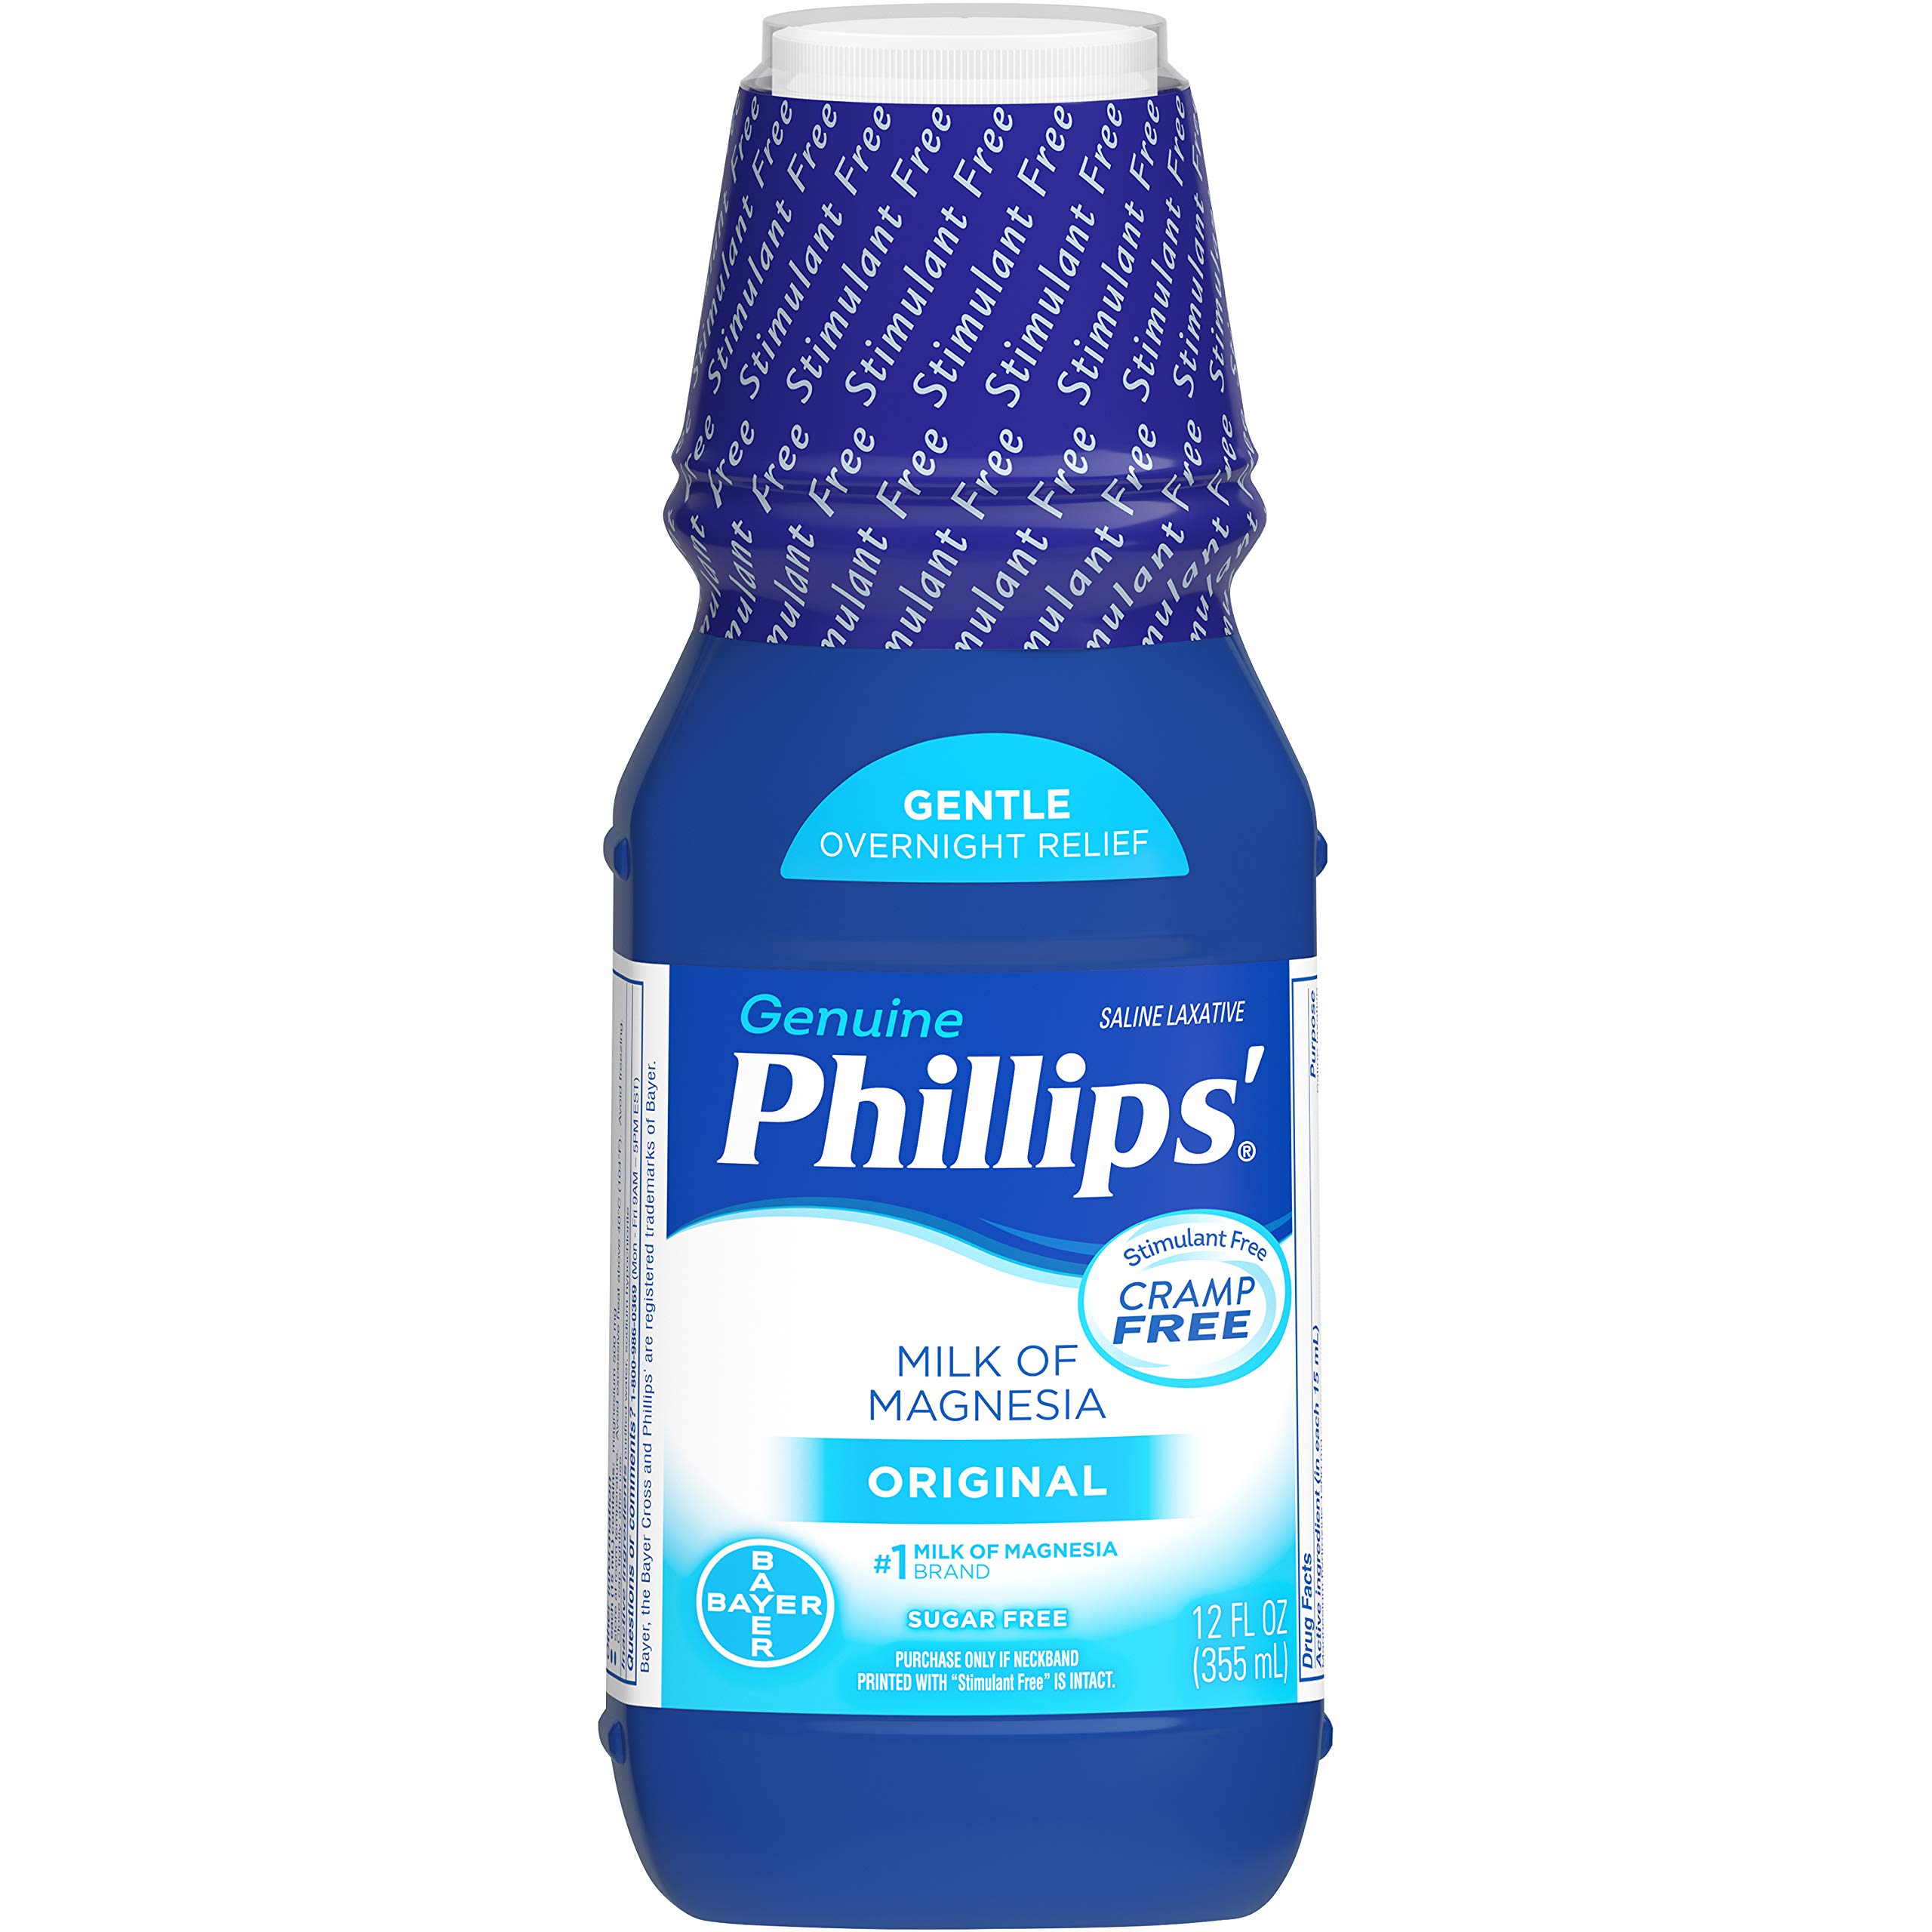 Phillips' Milk of Magnesia Liquid Laxative, 12 oz, Cramp Free & Gentle Overnight Relief Of Occasional Constipation, #1 Milk of Magnesia Brand